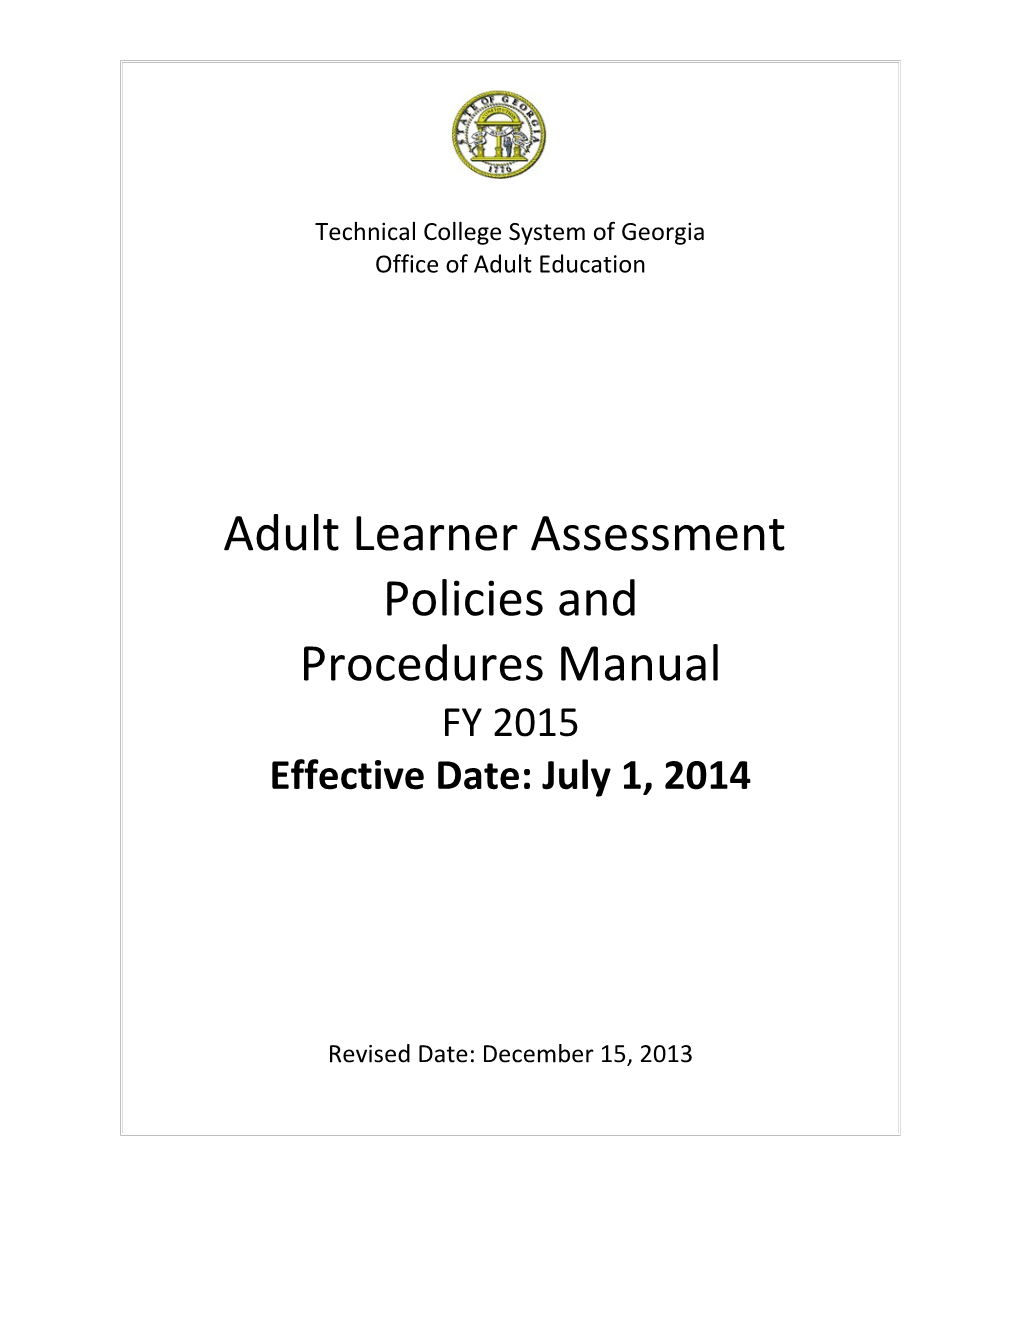 Adult Learner Assessment Policies and Procedures